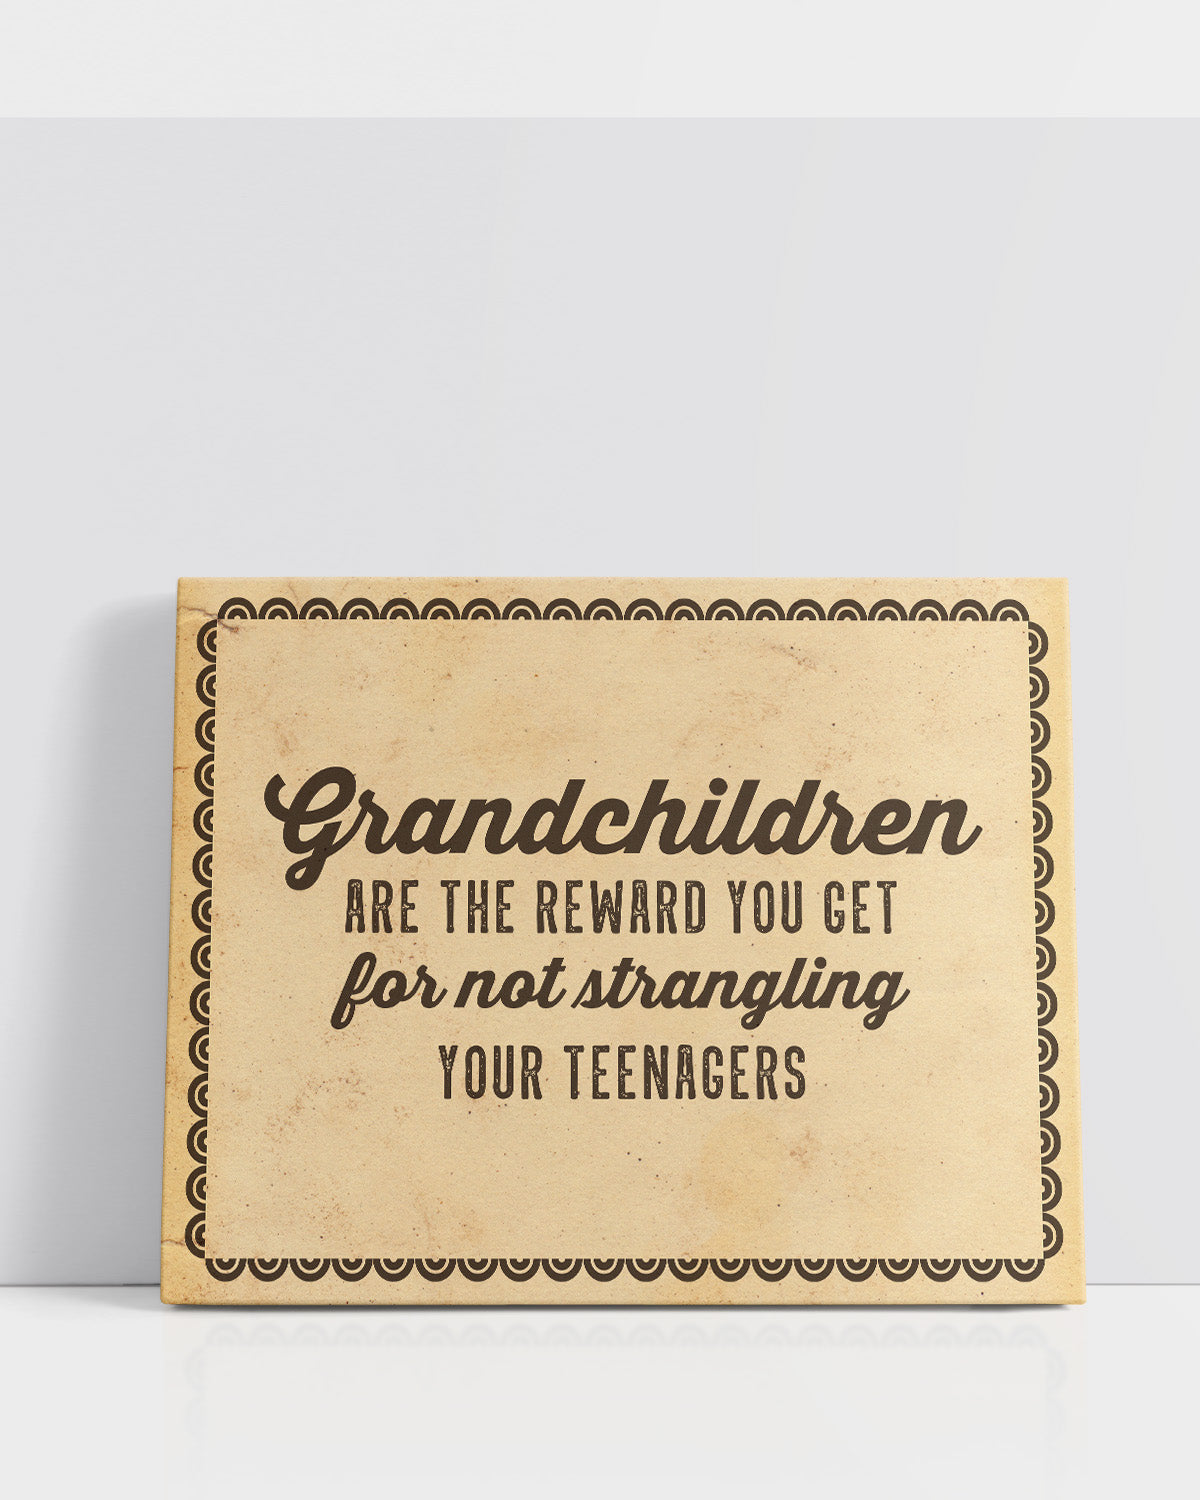 Grandparents Wall Art from Grandkids - Grandparents Day Gift Ideas - Best Gifts for Grandparents Wall Decor - Funny Grandparent Gift - Gifts for Grandparents